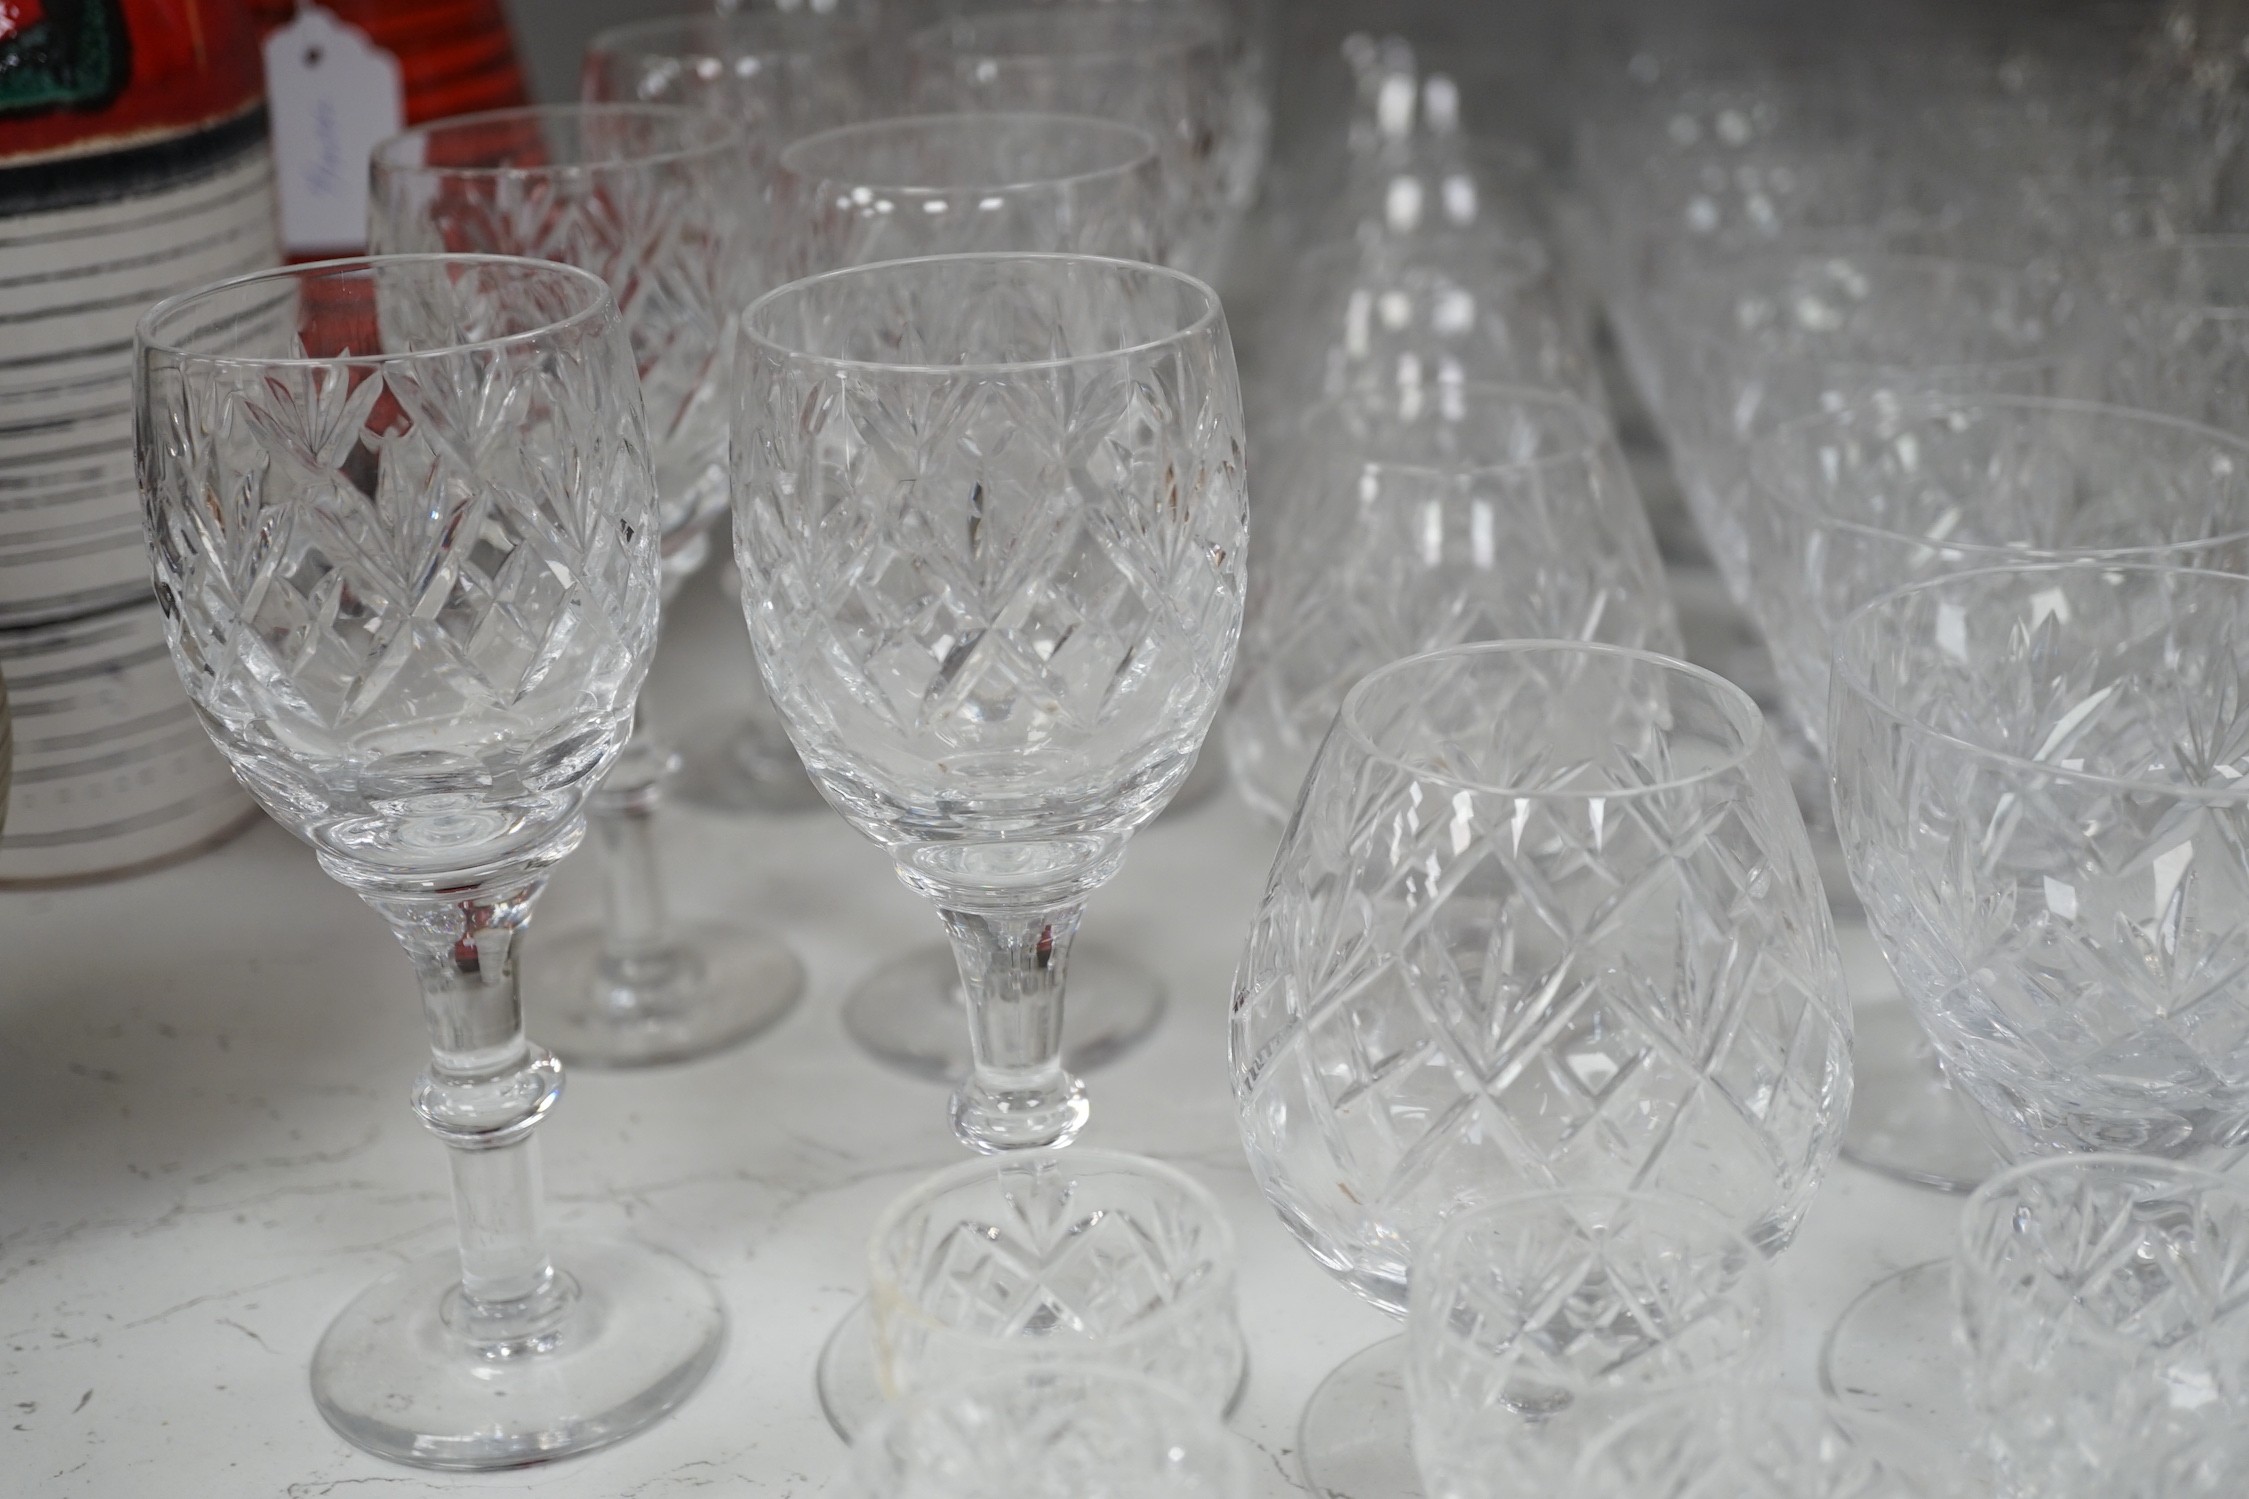 A collection of Royal Doulton glassware, to include: wine glasses, brandy balloons, etc. - Image 3 of 10